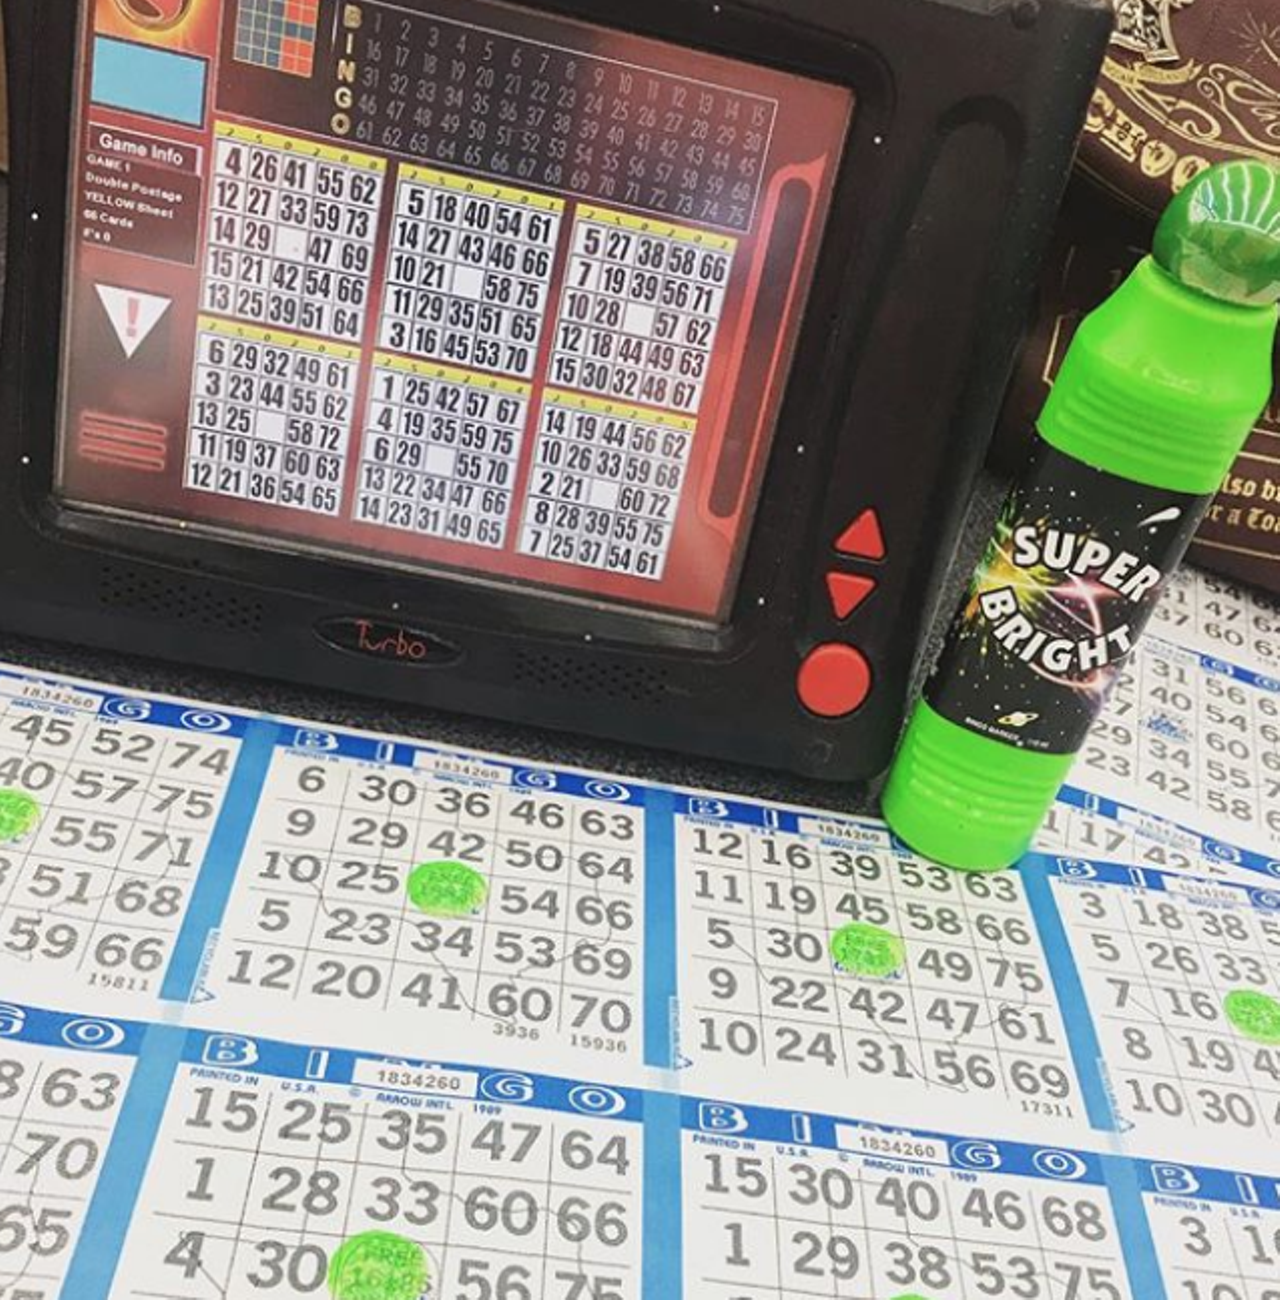 Try your luck (and people-watch) at Bandera Late Night Bingo
5810 Bandera Road, (210) 682-6000, goldenbingofamily.com
Get lucky with bae! Hopefully, in more ways than just winning a few rounds — or at least one — of bingo. *wink* Bingo can be a fun dating activity and, since there’s no real skill involved, there’s very little chance that the competition will get too serious. You can even win a bit of prize money, if you’re lucky.
Photo via Instagram / ashleysymphony87